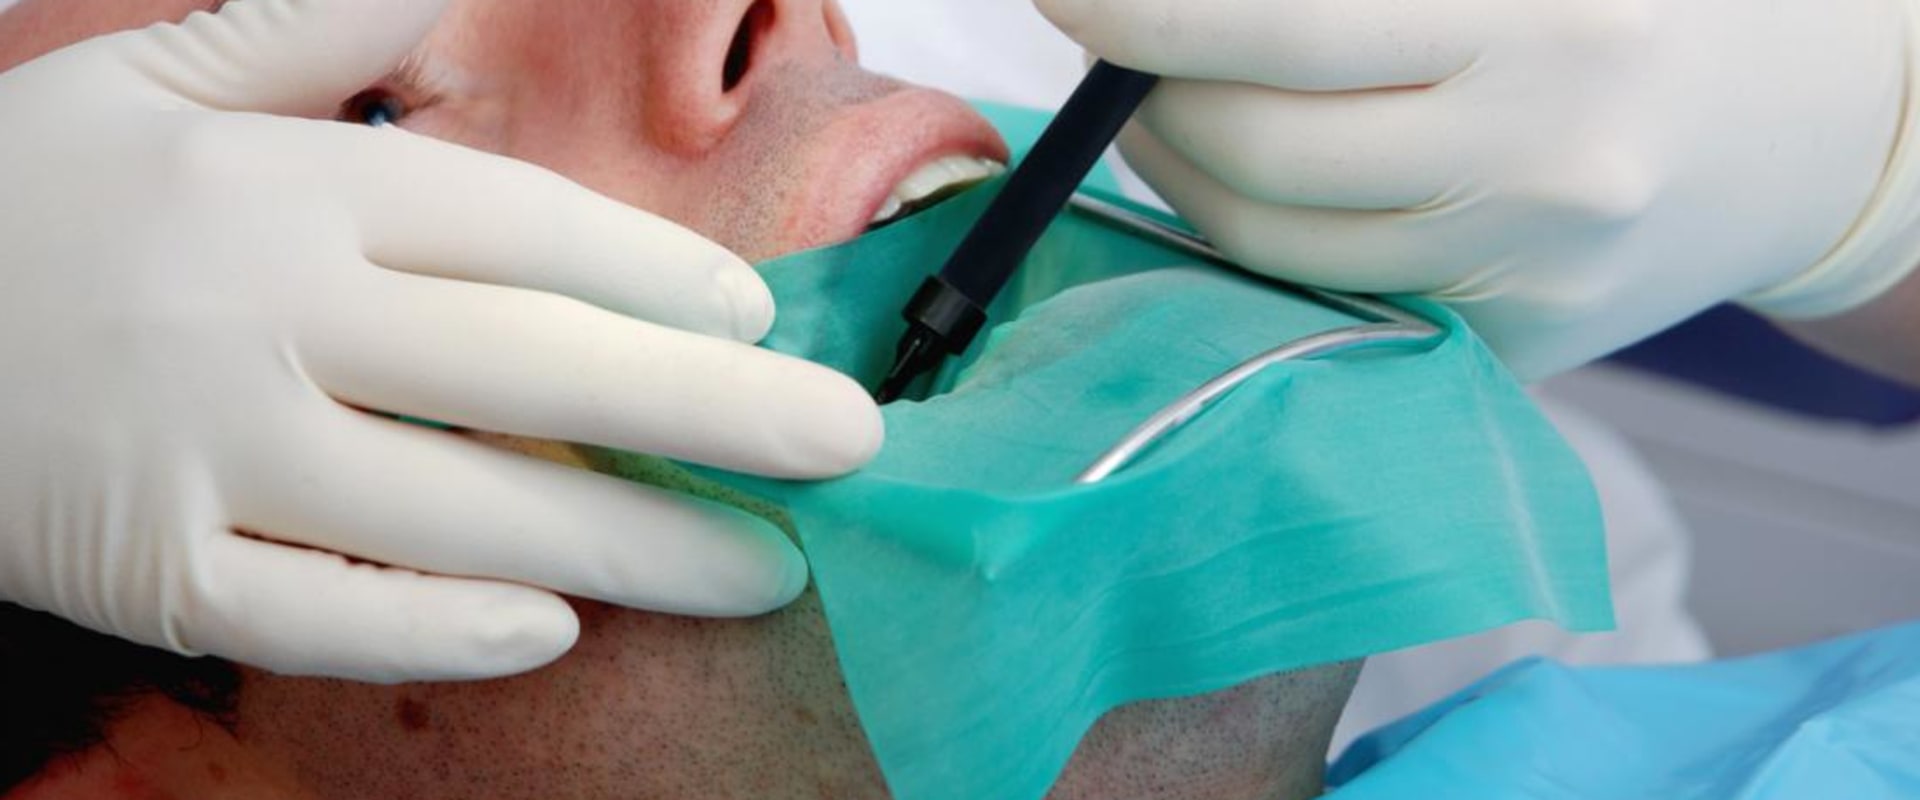 Should a Dentist or Endodontist Do a Root Canal?